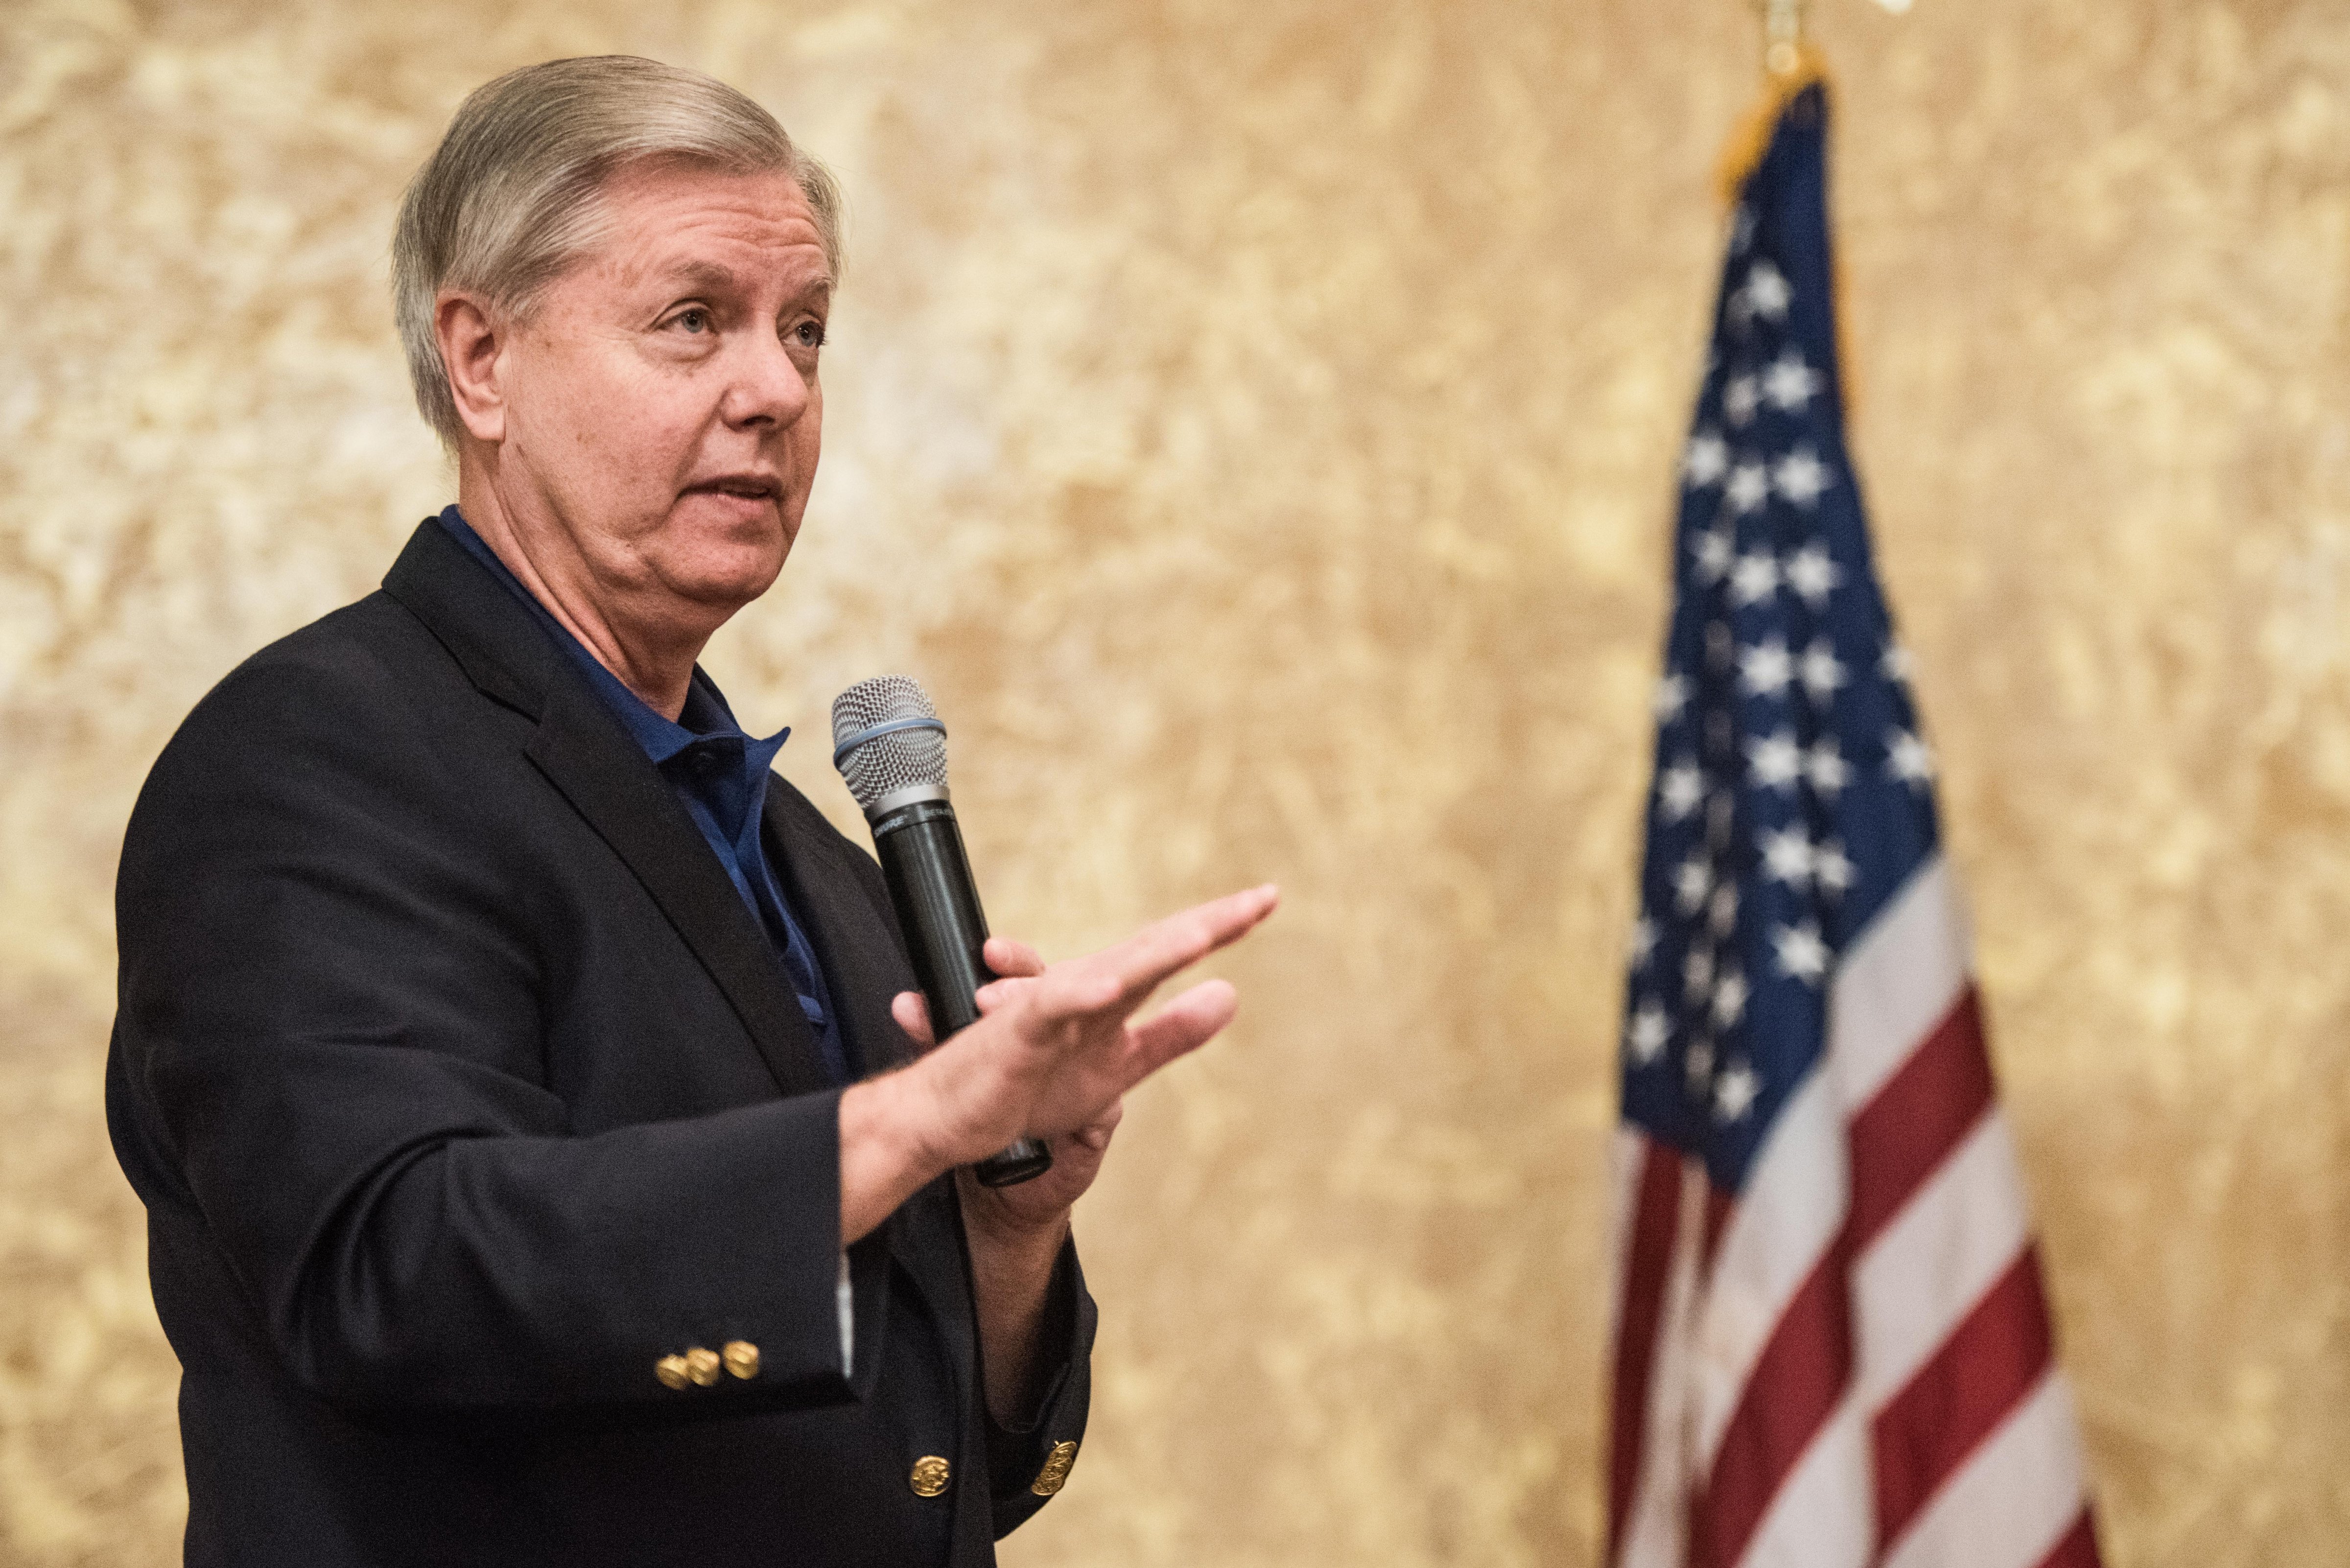 Sen. Lindsey Graham Hears From Constituents During Townhall In Columbia, South Carolina